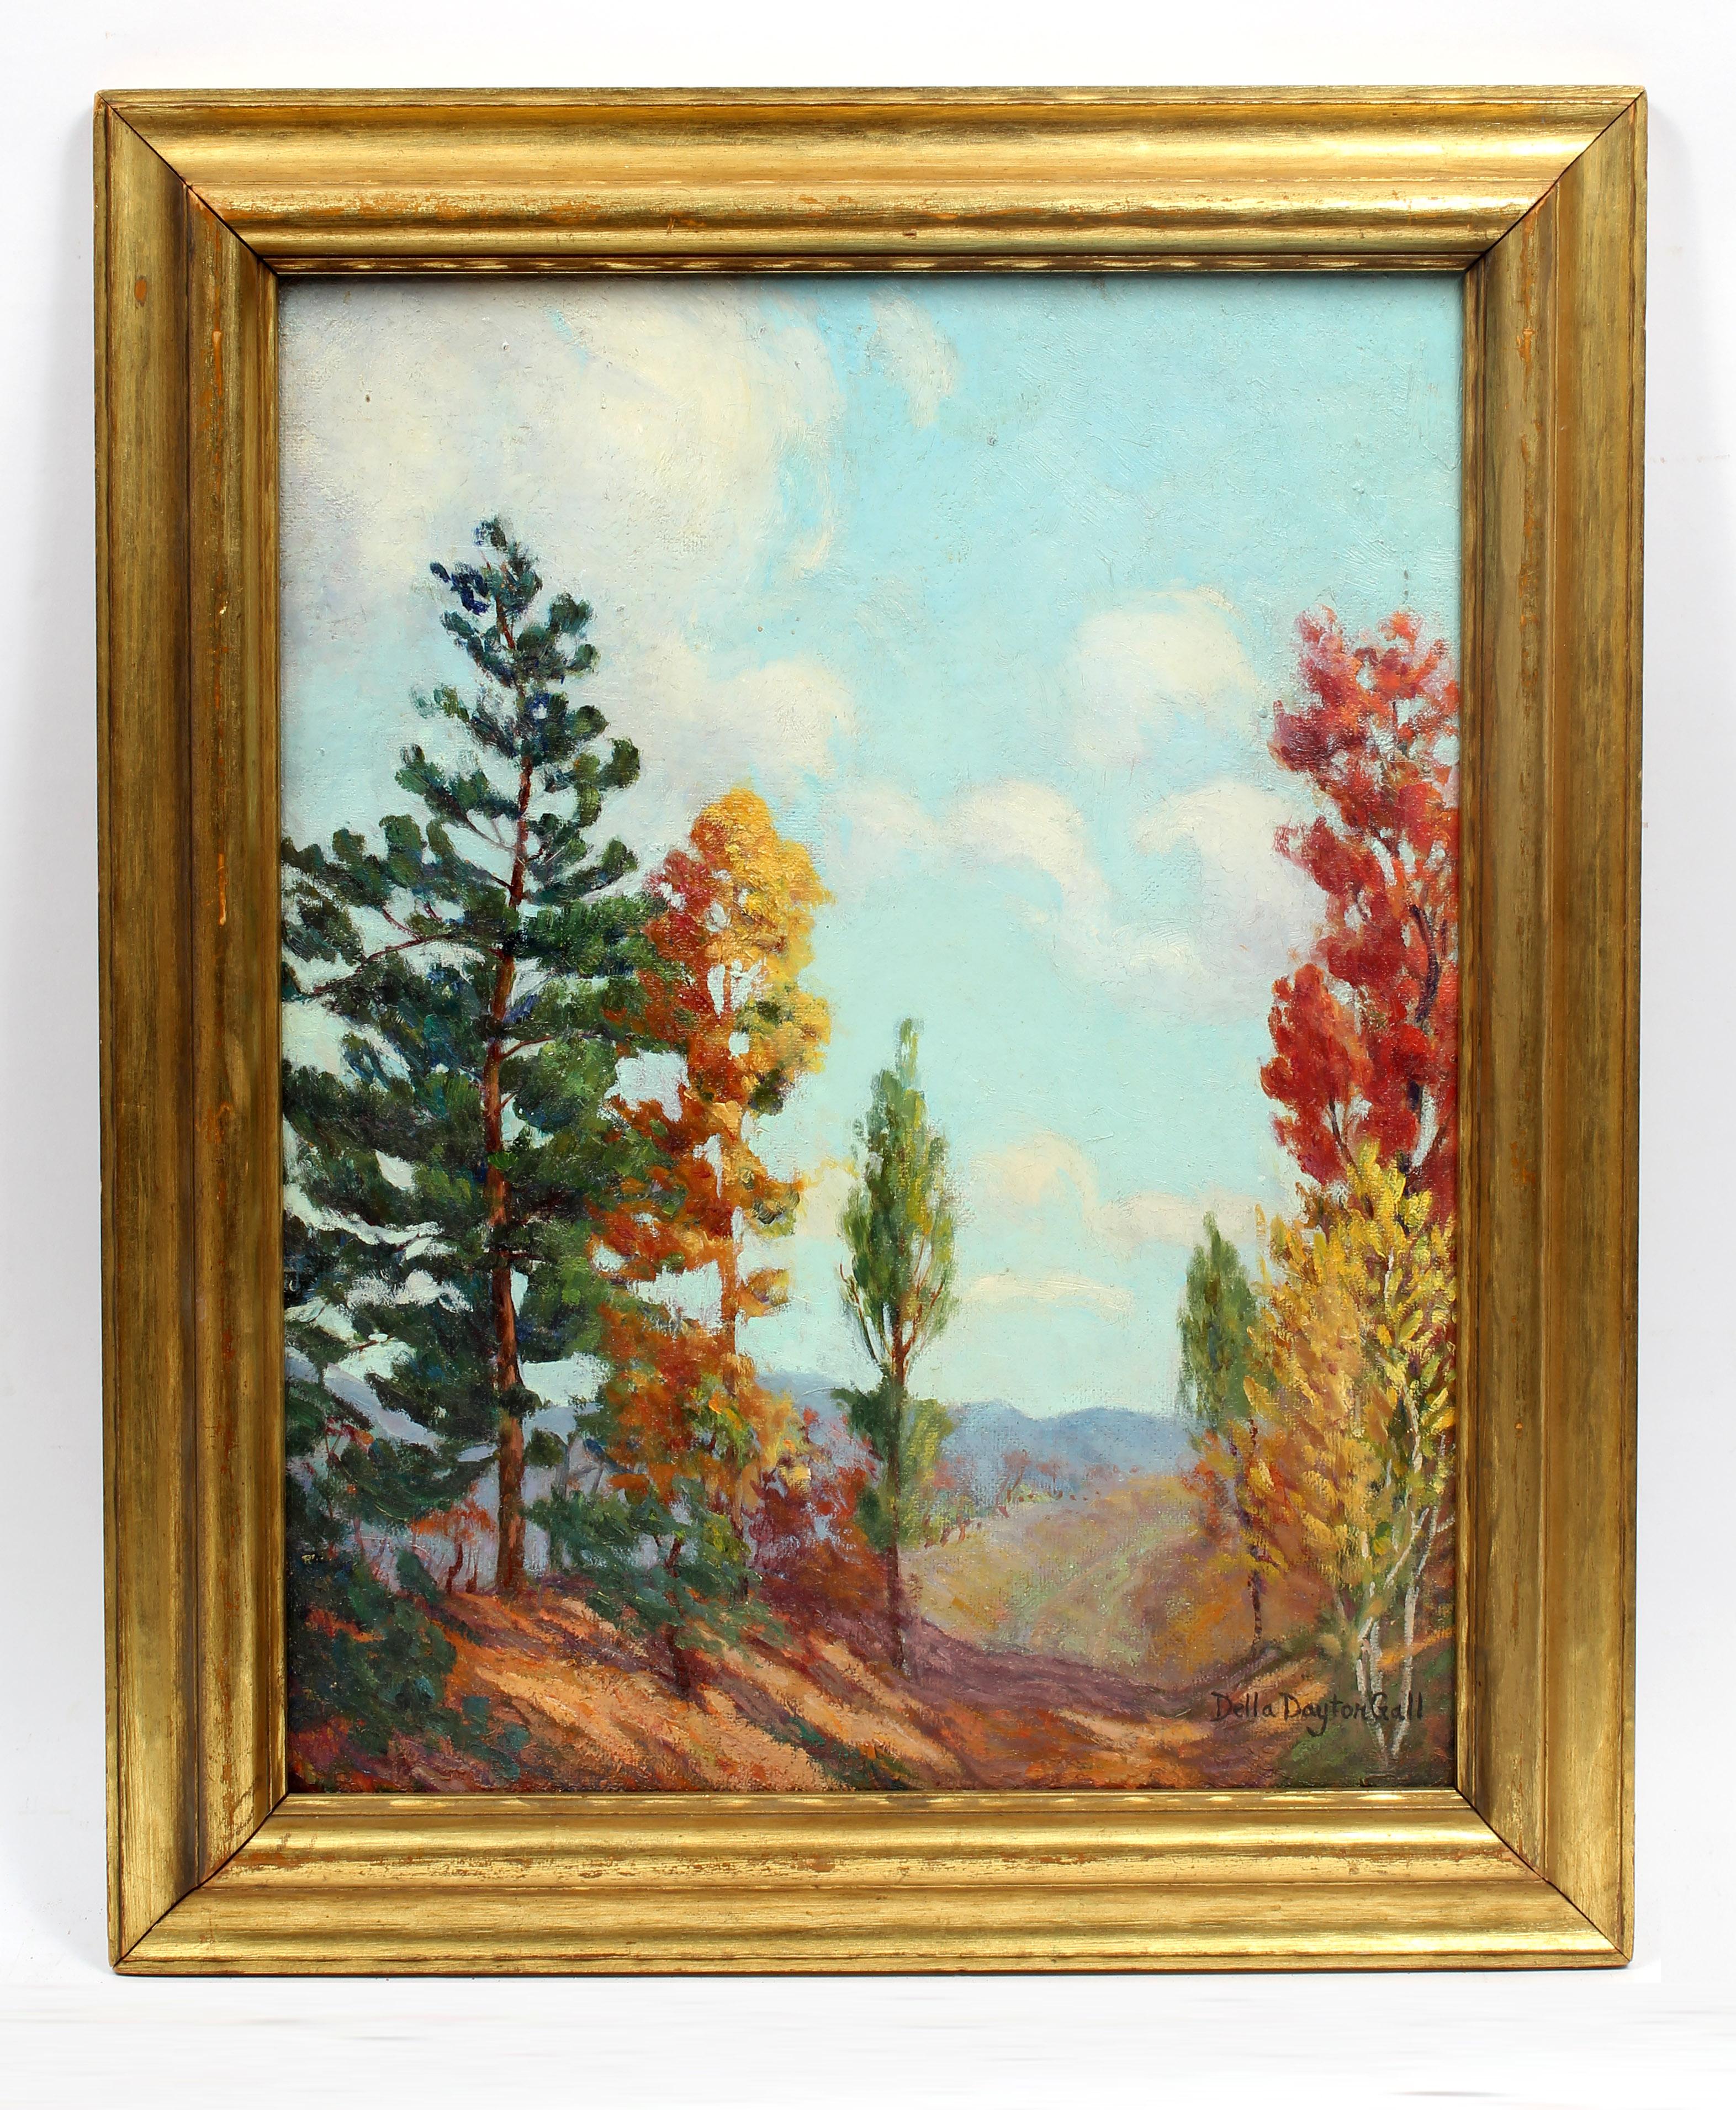 Della Dayton Gall Landscape Painting - Antique American Oil Painting Female Artist New York Framed Fall Beauty 1920